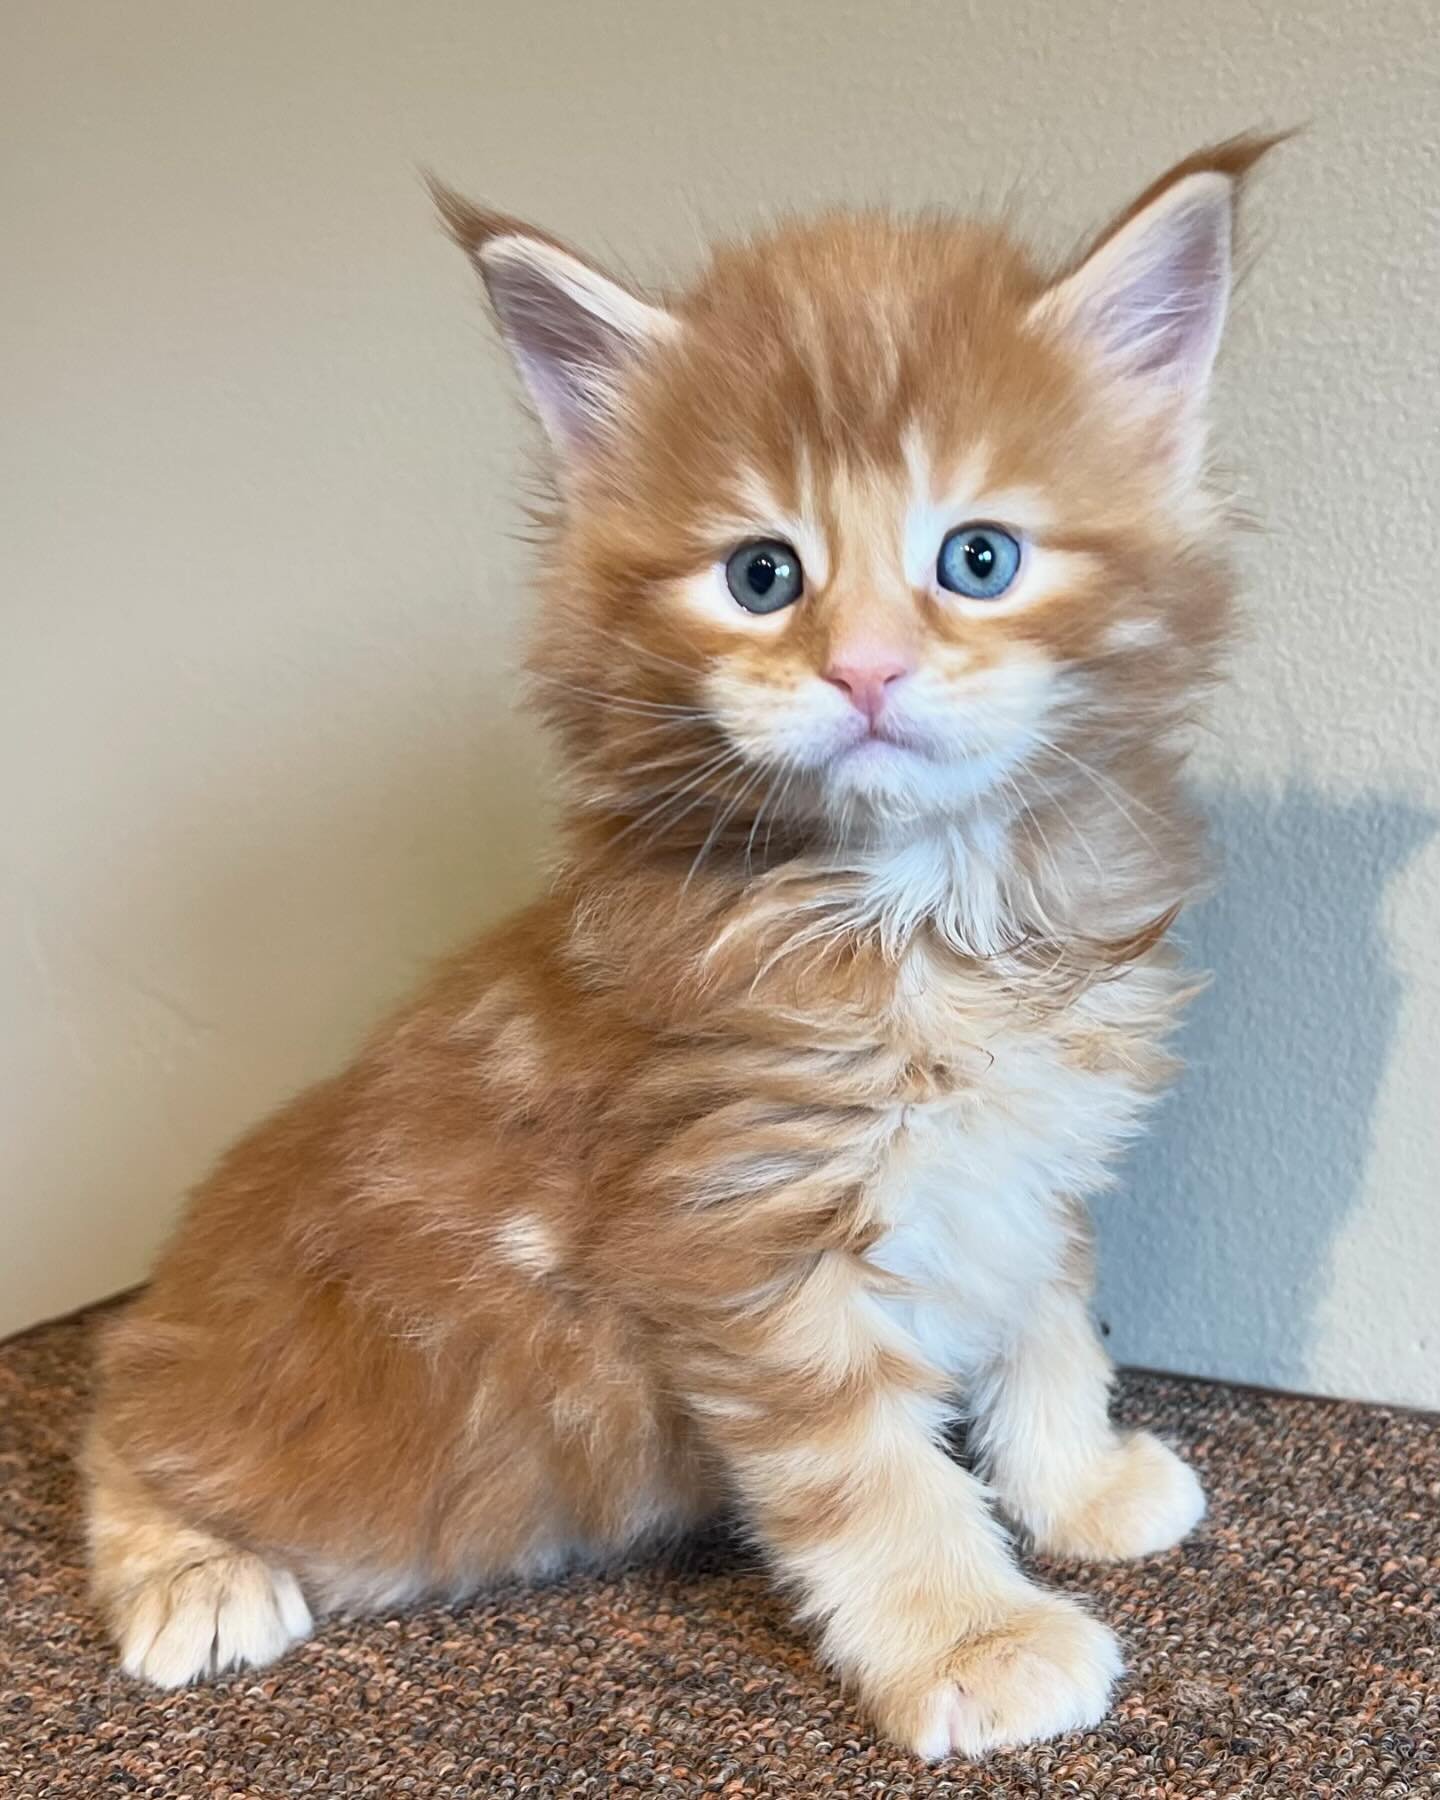 ✨FEATURED KITTEN✨
High Country Maine Coons &ldquo;Erik&rdquo;
Red classic tabby ~ Male
&bull;
Meet Erik! We love our little redhead! He is looking for his FURever home!
&bull; 
LINK IN BIO TO INQUIRE!

#mainecoon #mainecoons #mainecooncat #mainecoonl